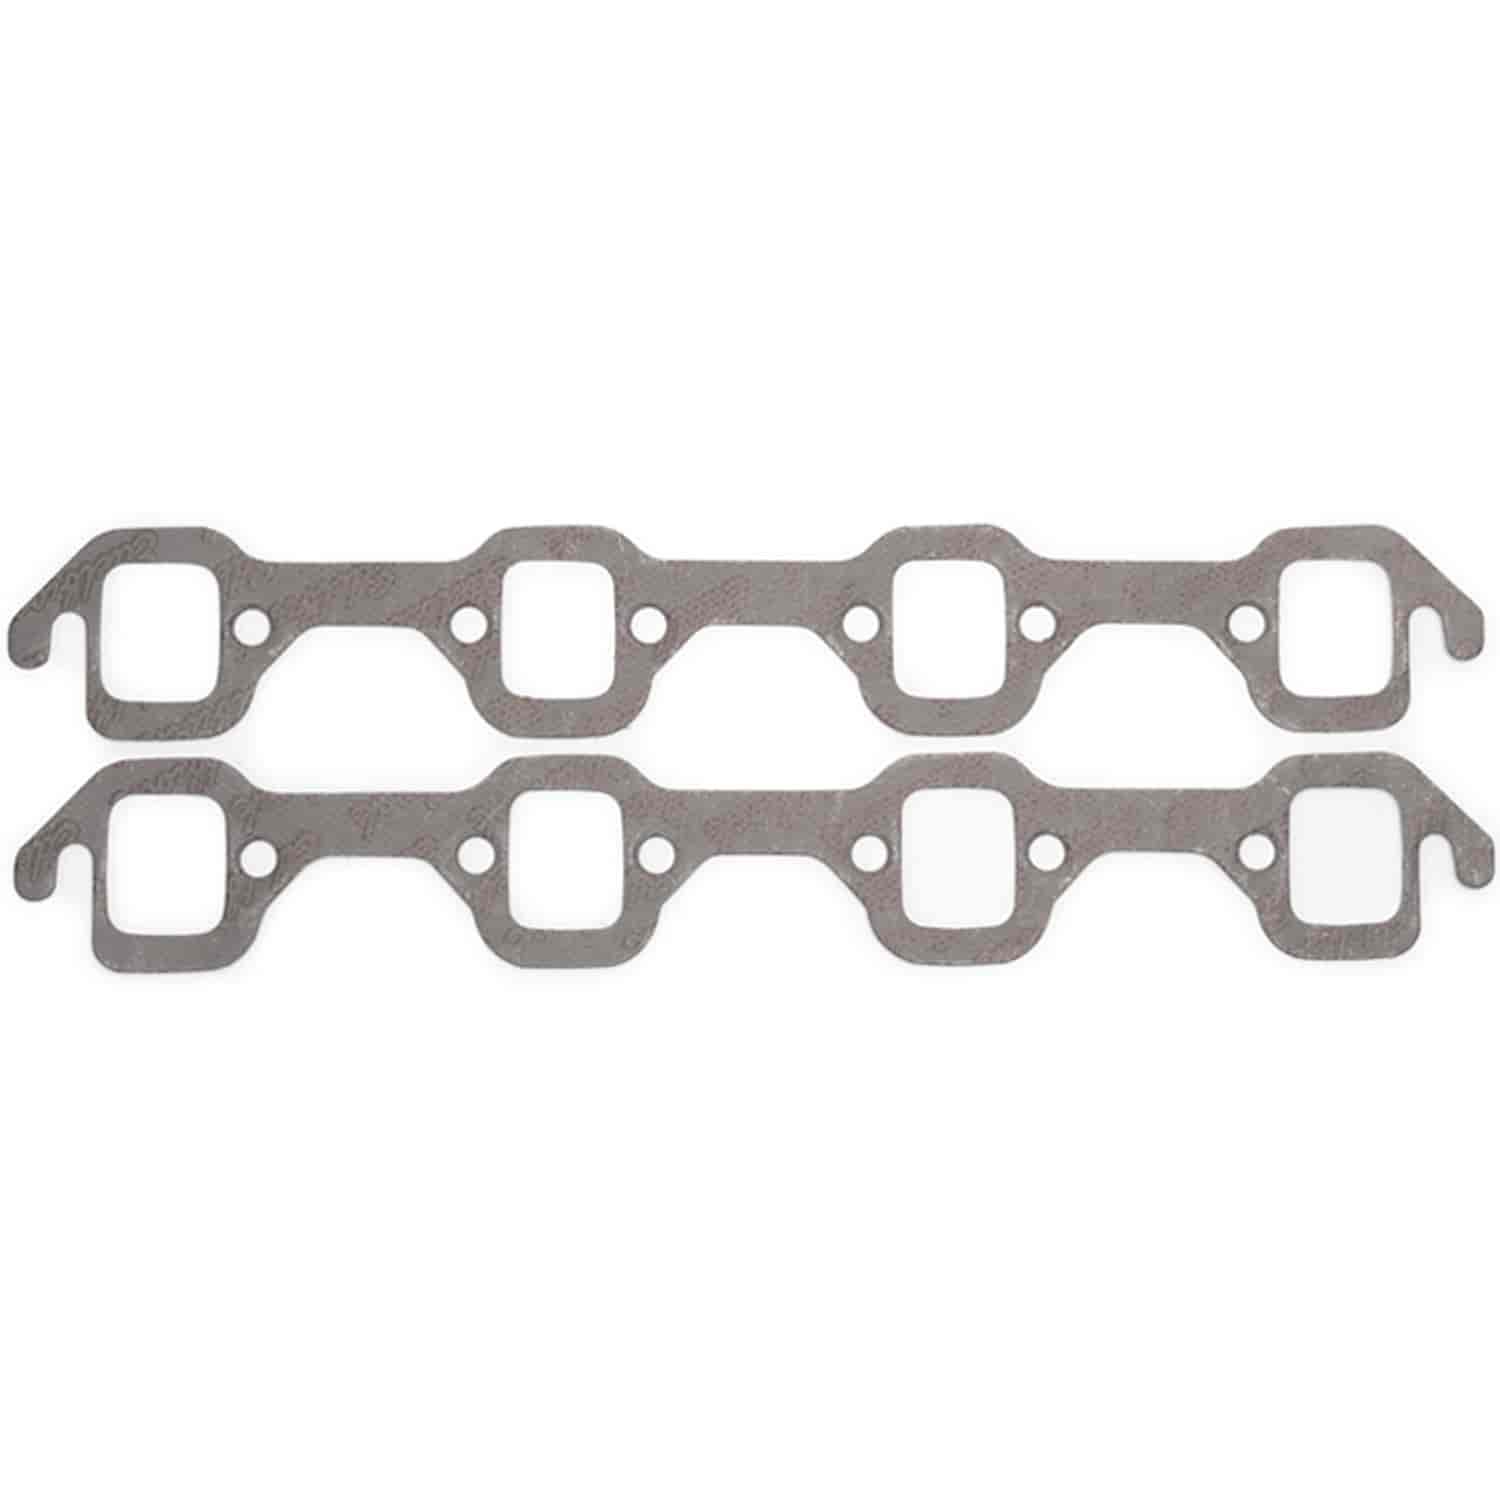 Exhaust Gaskets for Small Block Ford